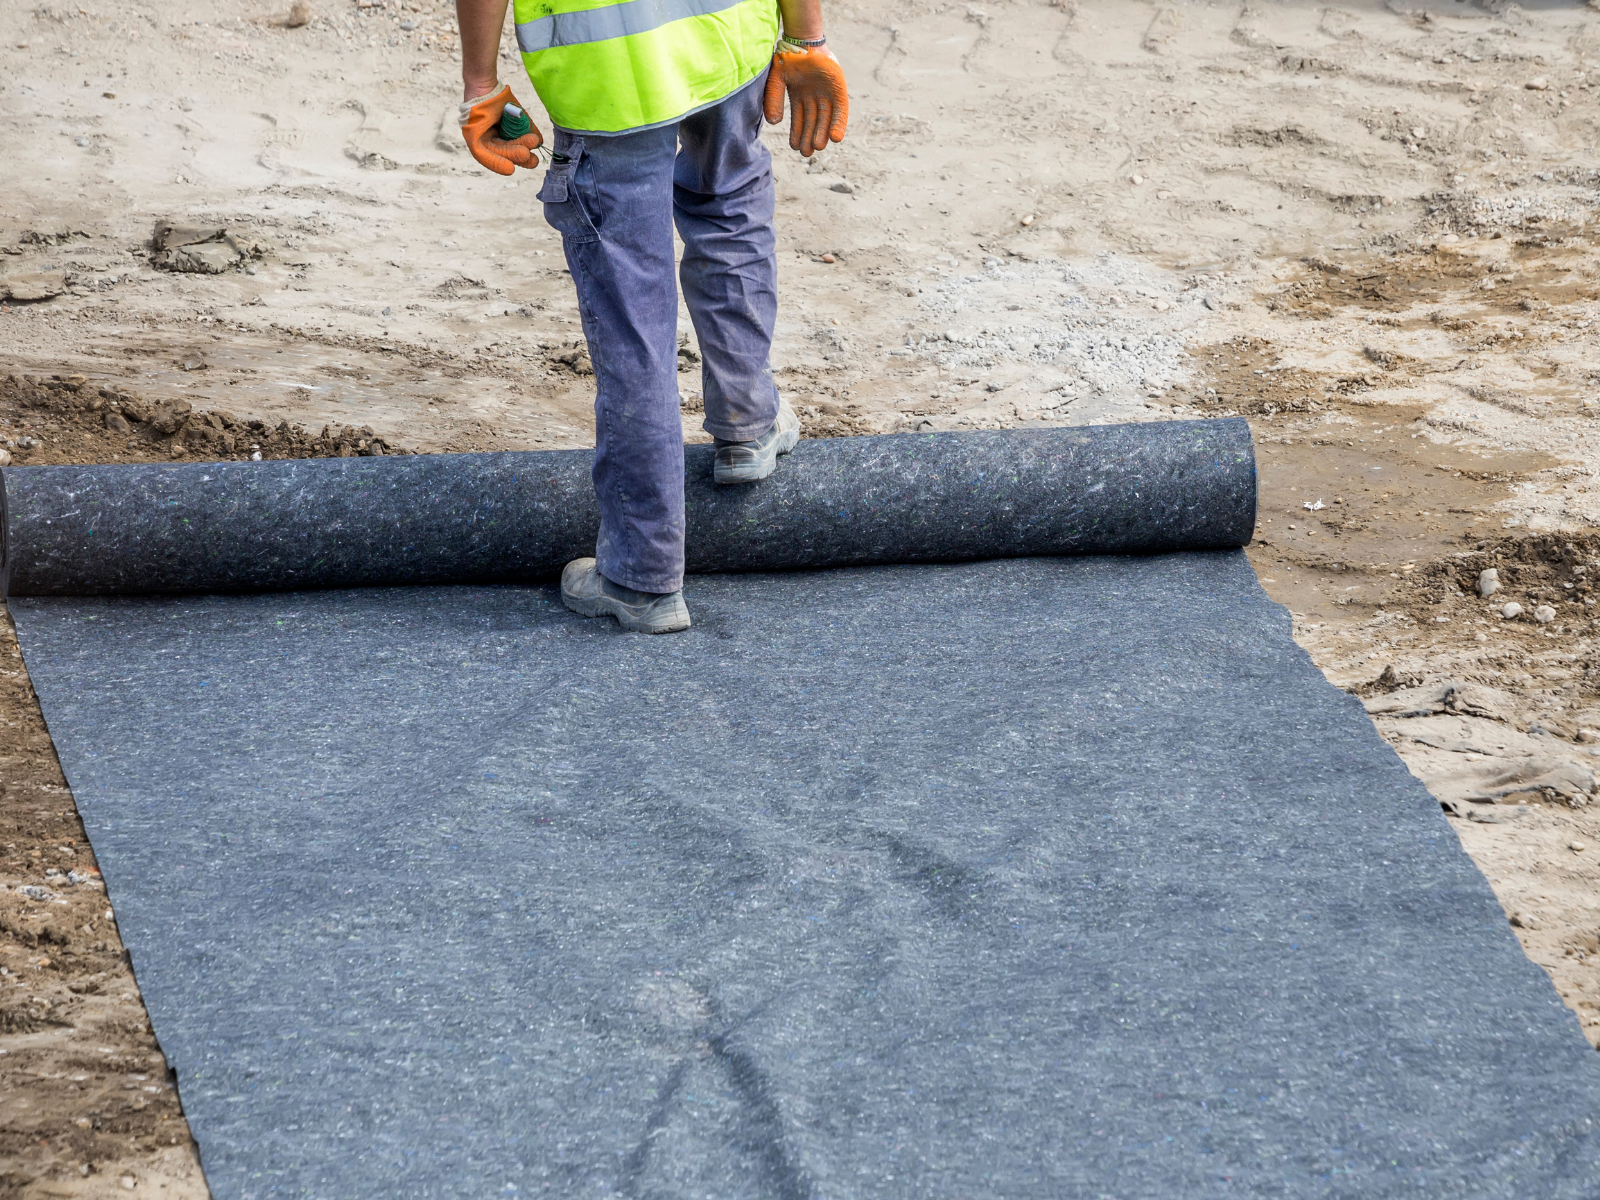 Construction worker laying out a Geotextile Fabric